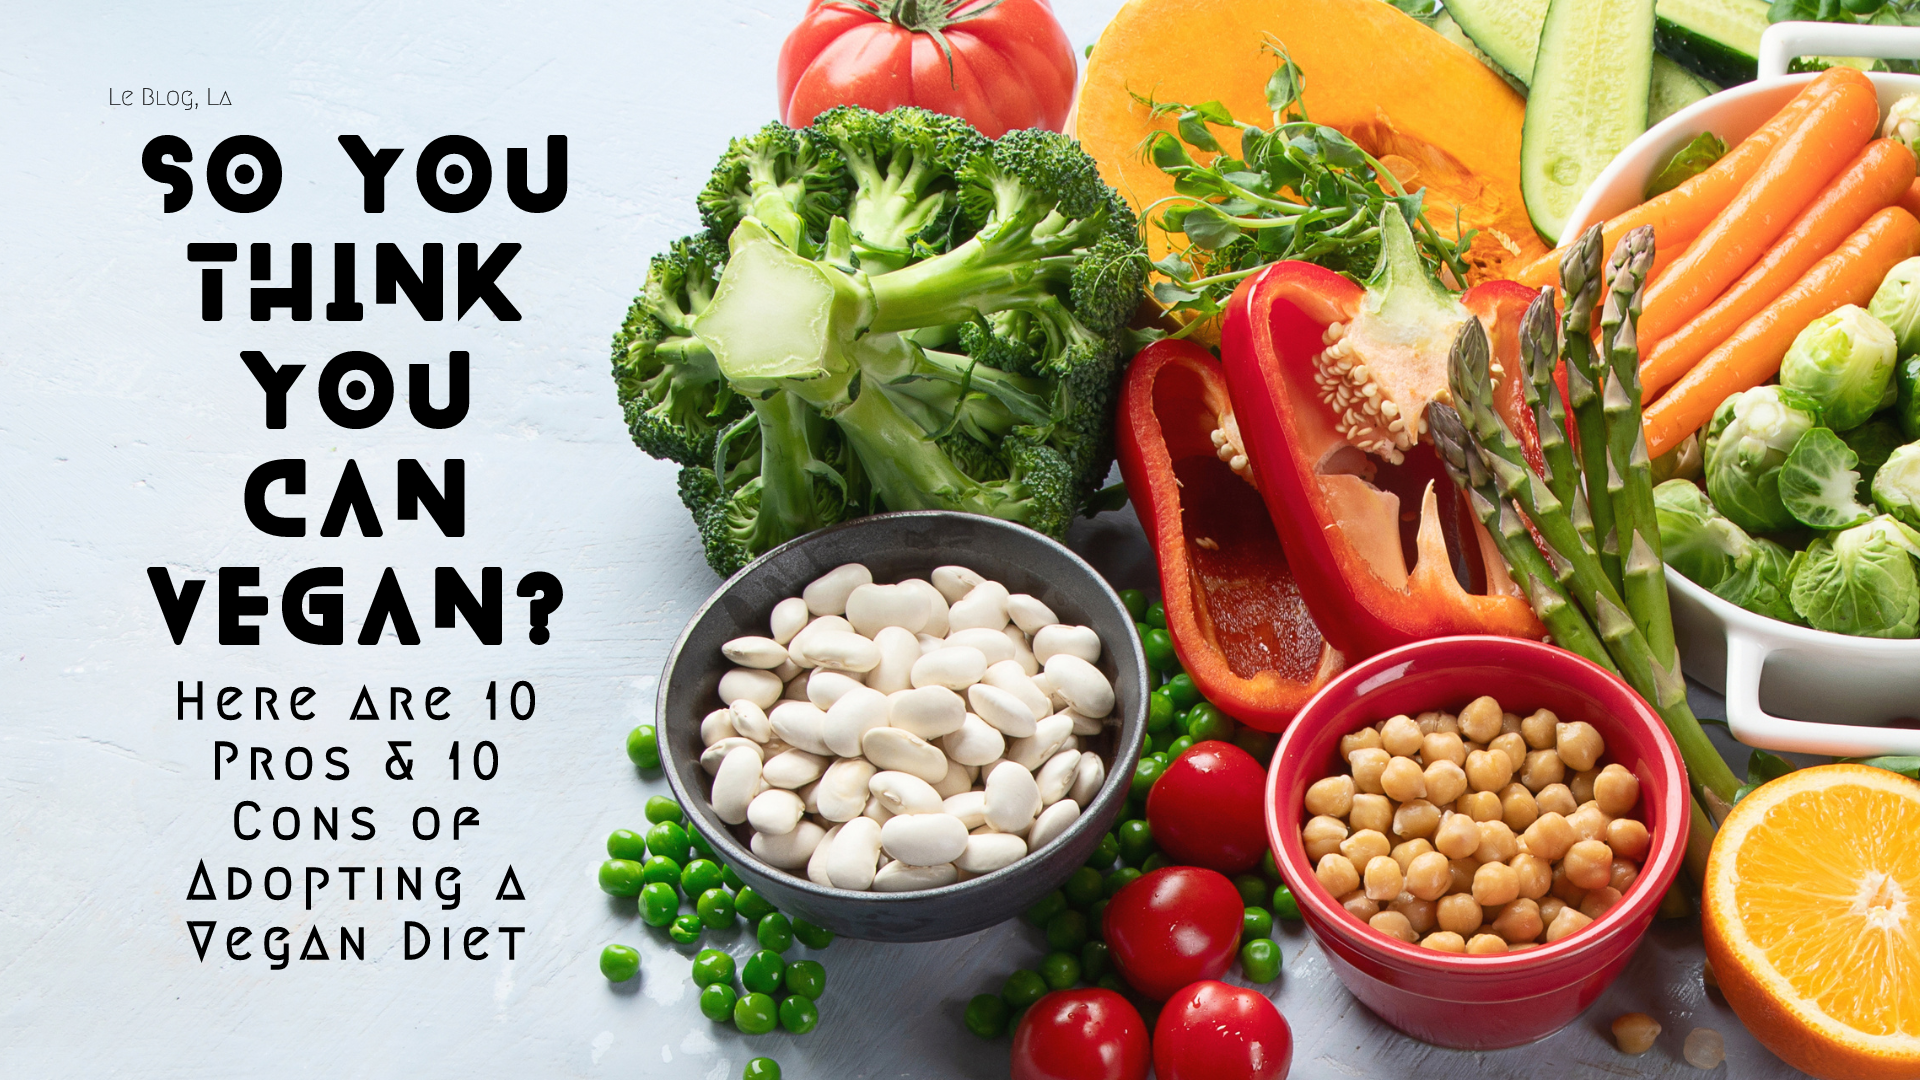 So You Think You Can Vegan? 10 Pros & 10 Cons of Adopting a Vegan Diet